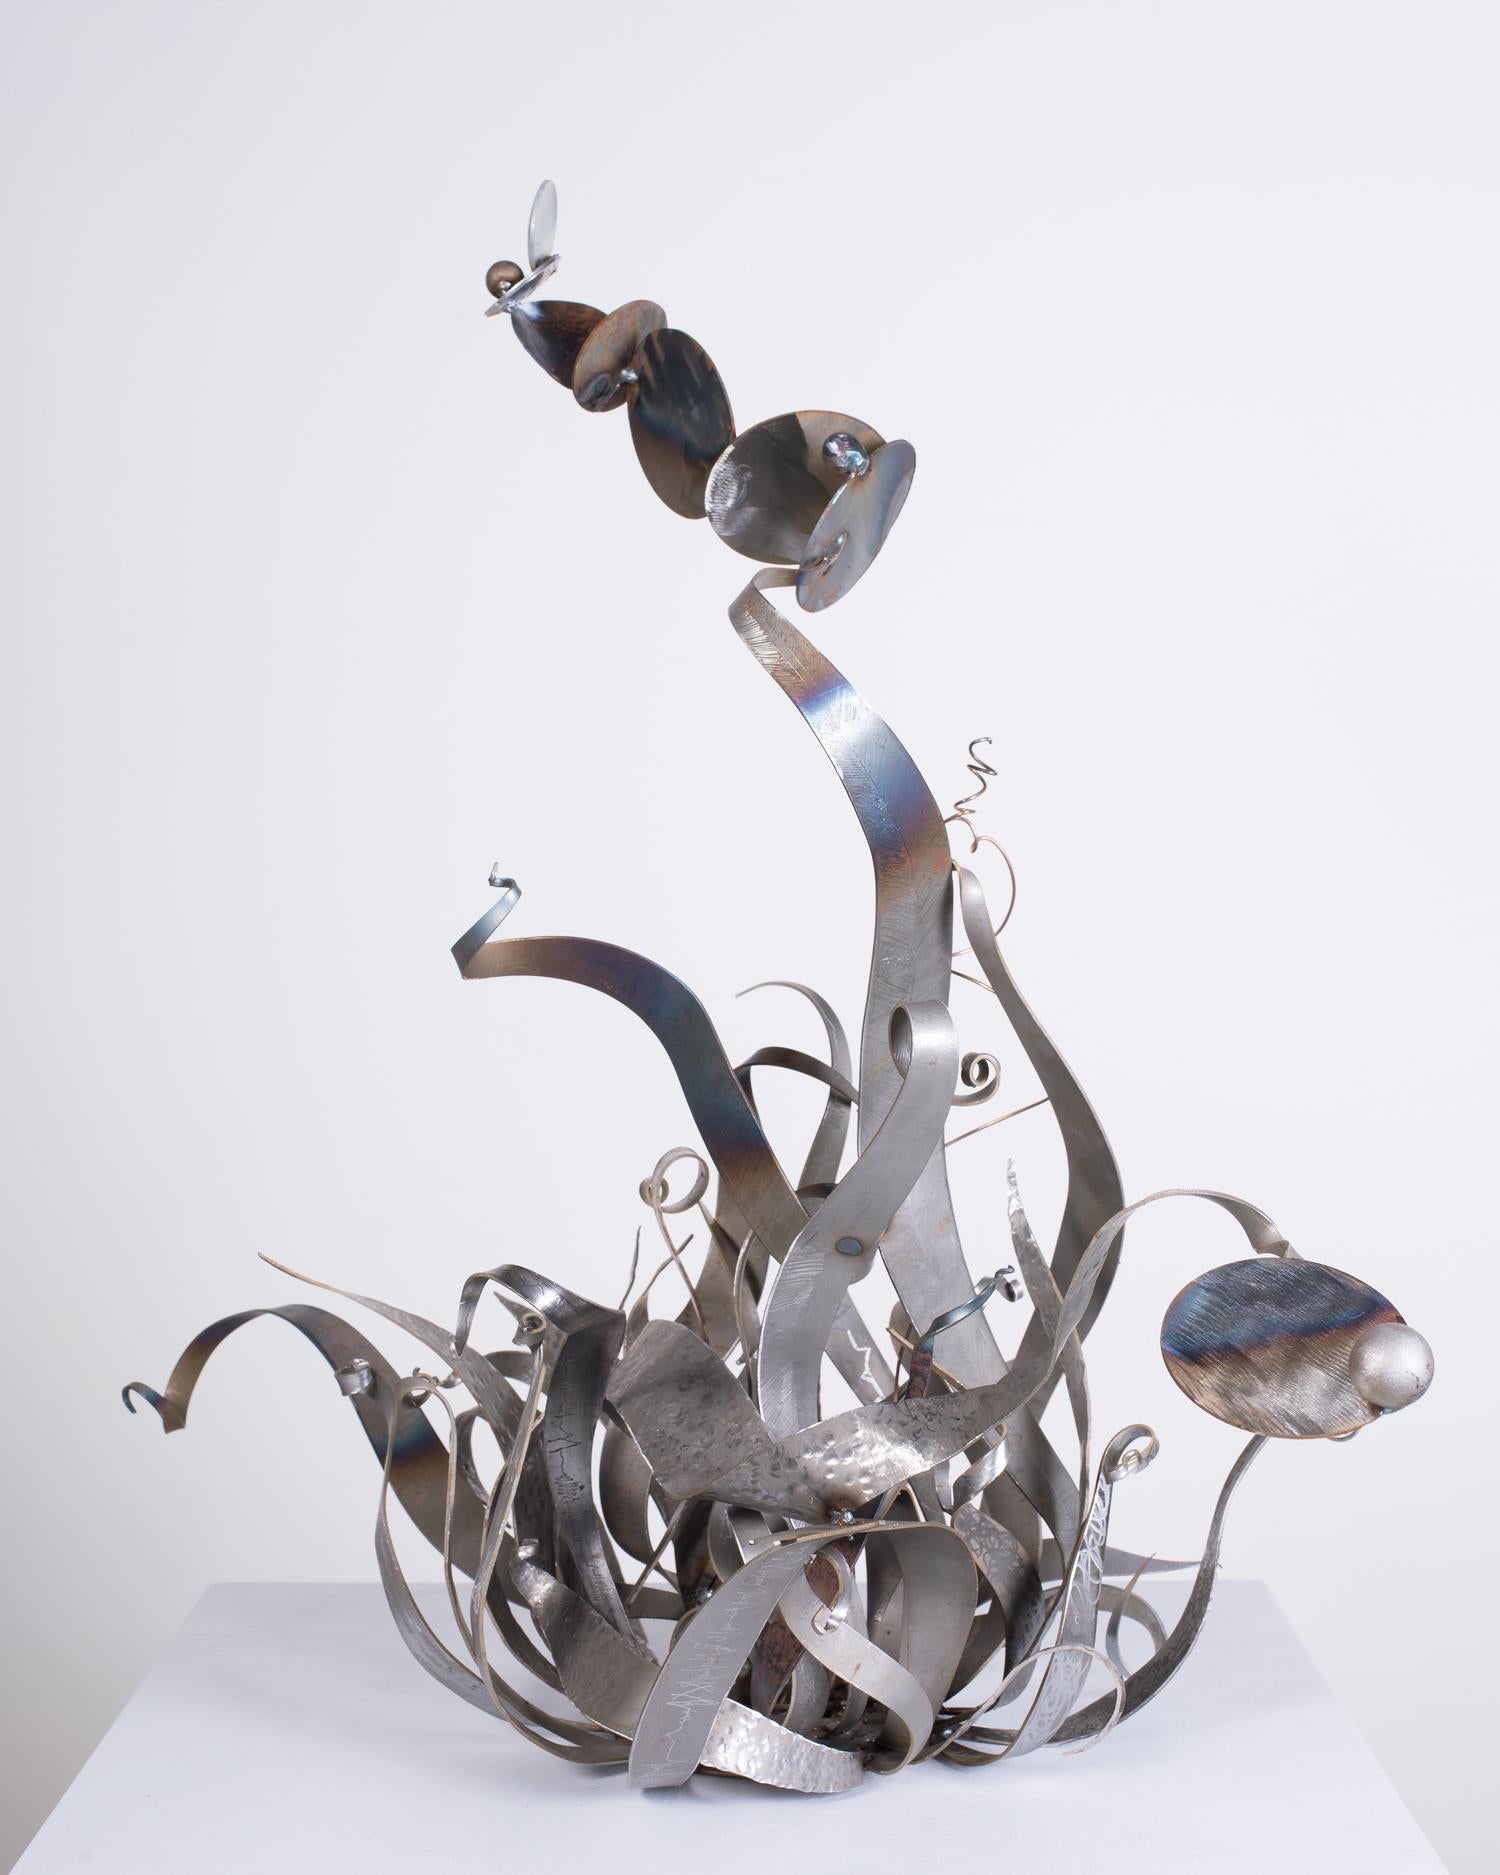 "Ringmaster", steel, whimsical, grassy shapes, sculpture - Sculpture by Sarah Alexander